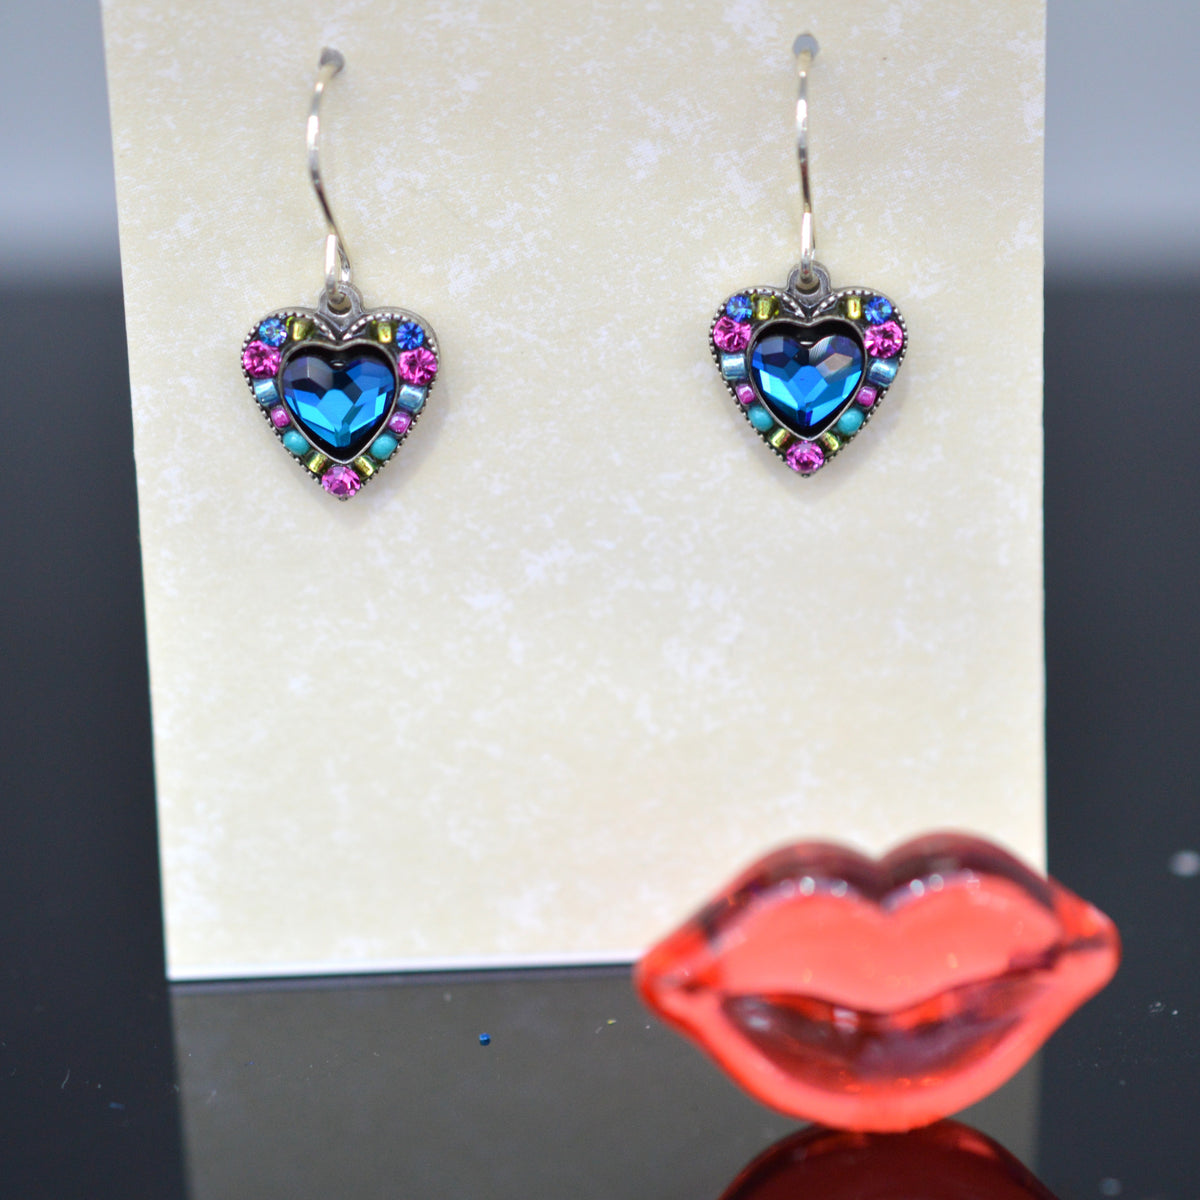 Antique Silver Plated Heart Earrings With Bermuda Blue Crystals by Firefly